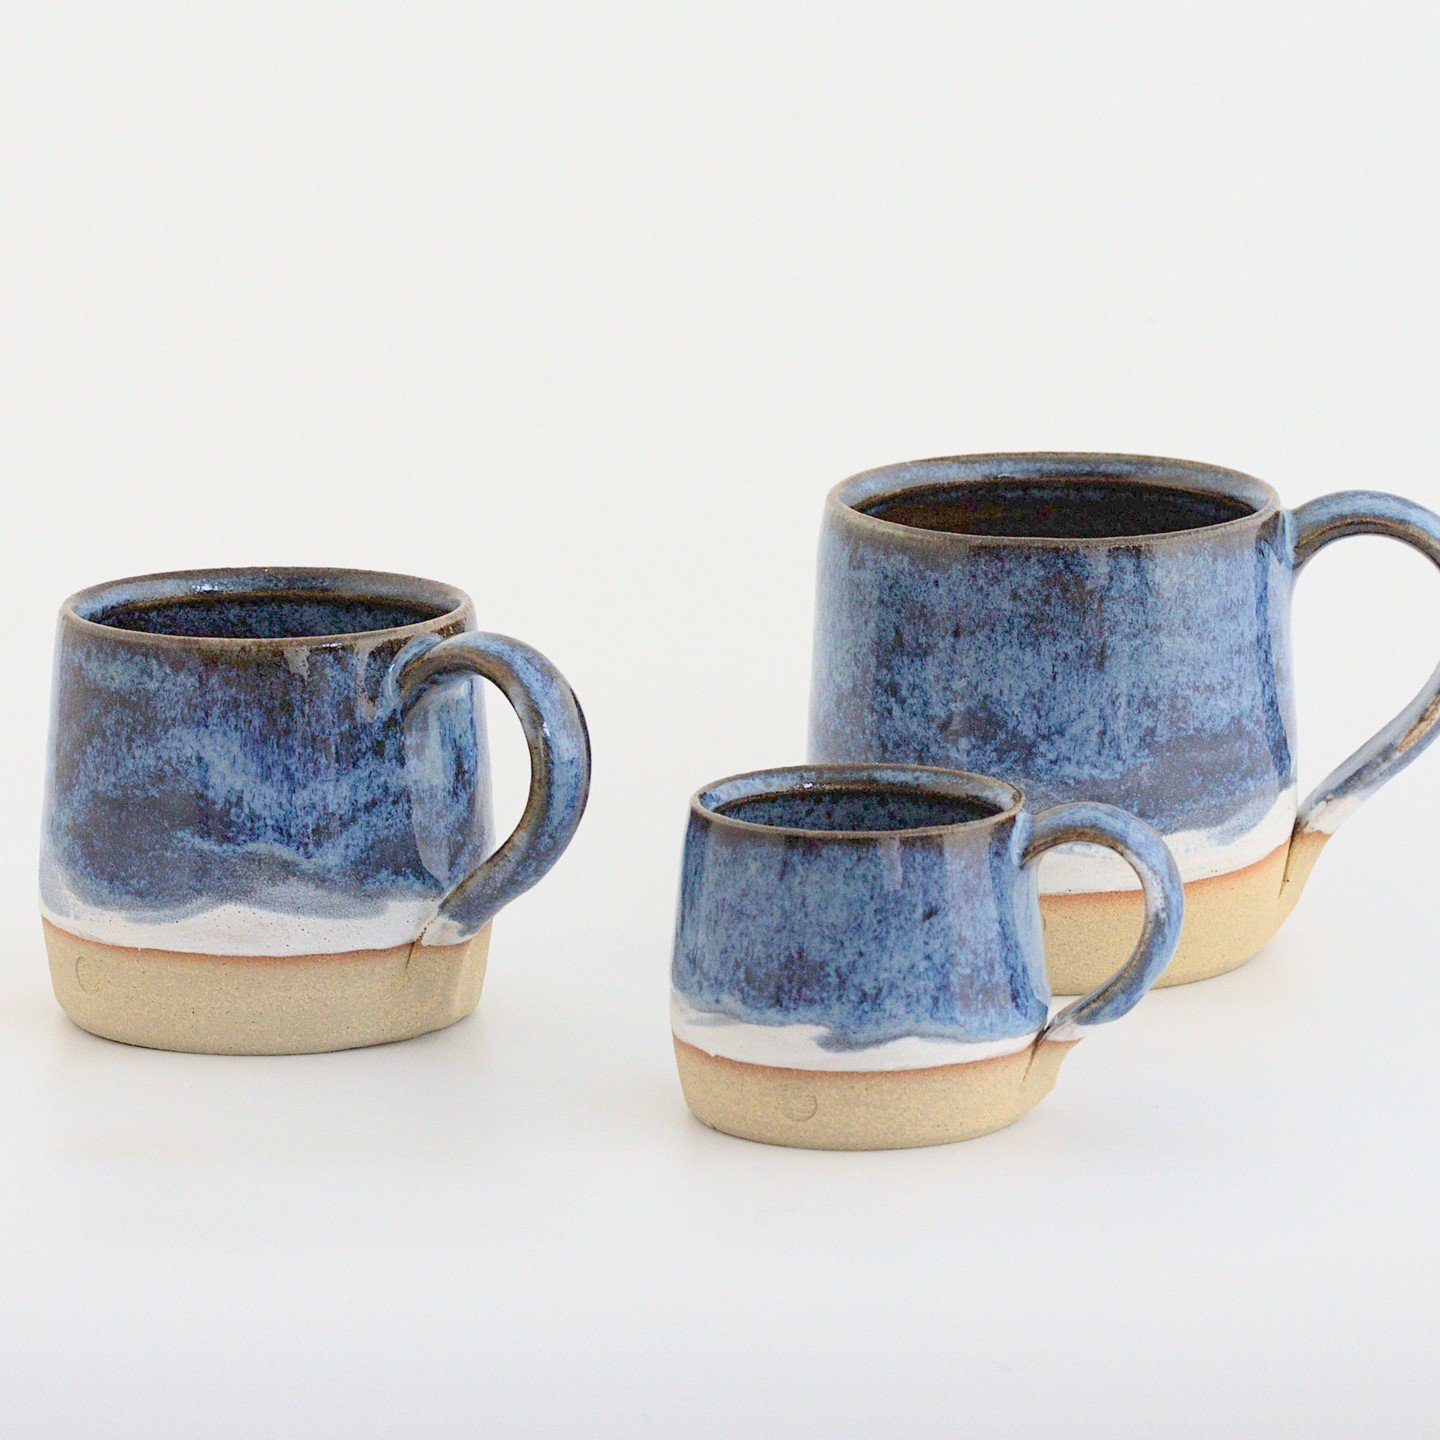 Sometimes 'Potter' seems a little too vague as a job description - 'Cupmaker' feels about right these days. It's all cups, cups, cups. Or mugs, if you'd prefer. There's the odd batch of bowls or jugs to make, but you just know there's more cups on th